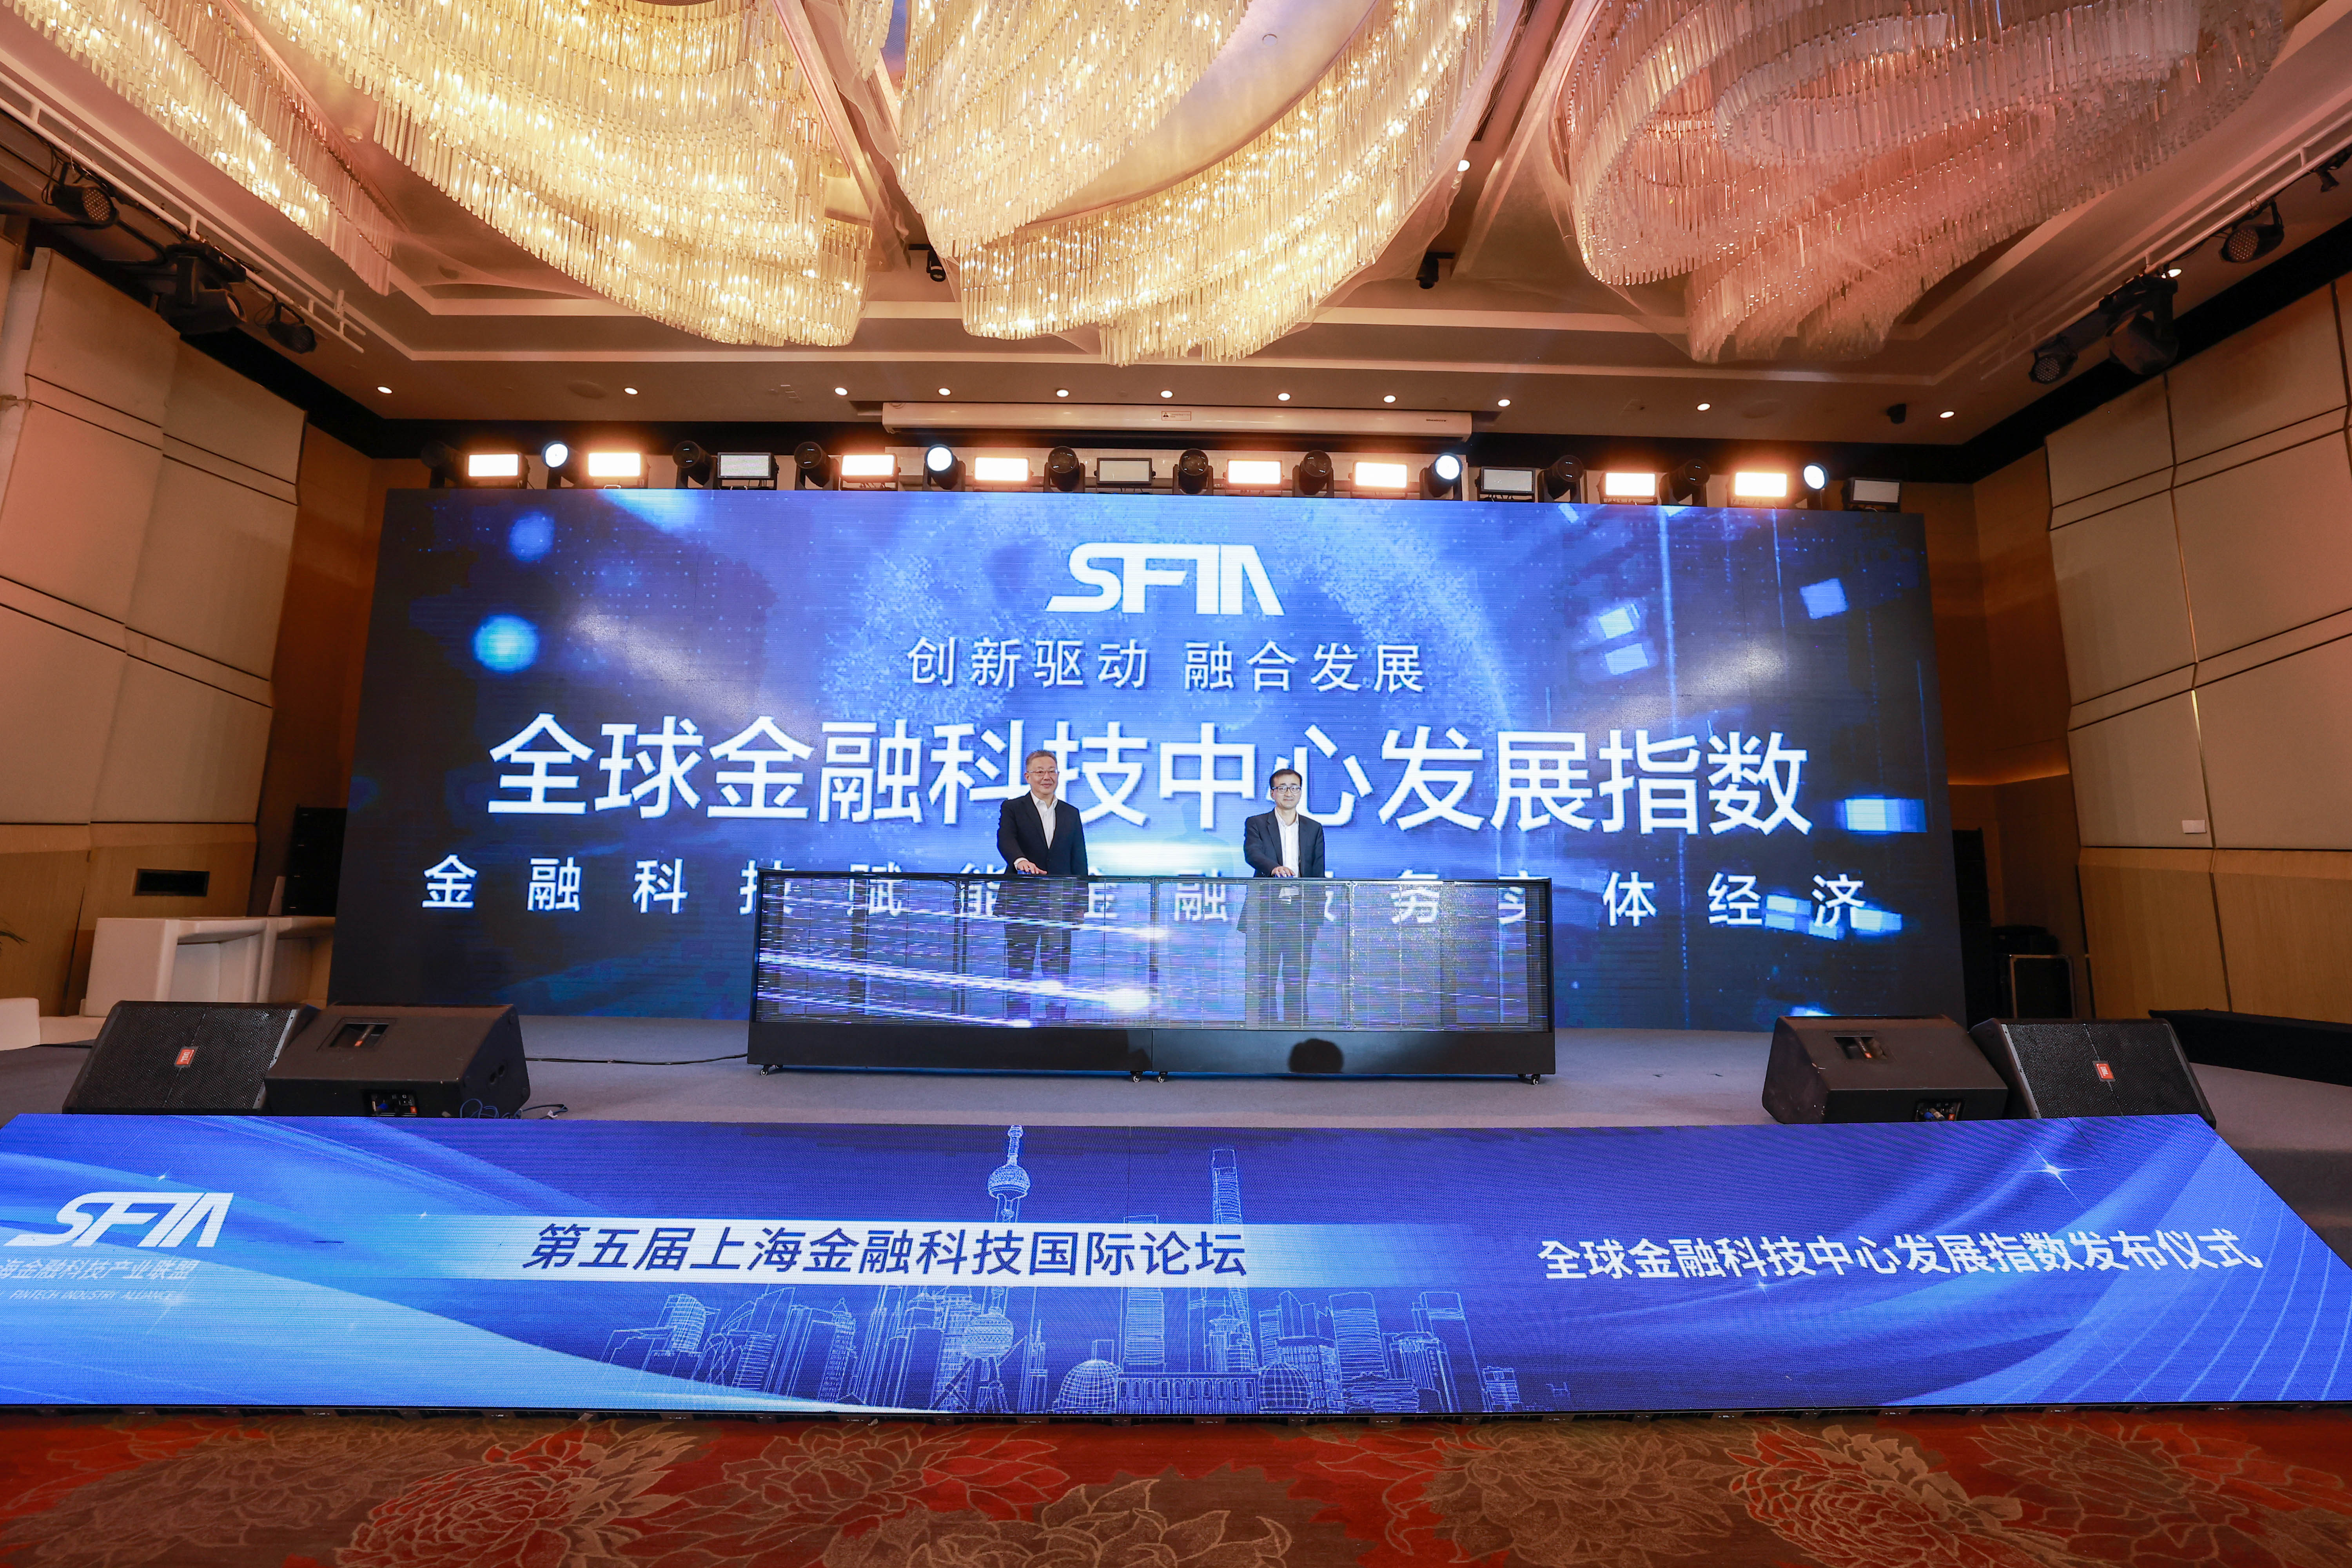 The 5th Shanghai Fintech International Forum was held and launched a series of heavy content